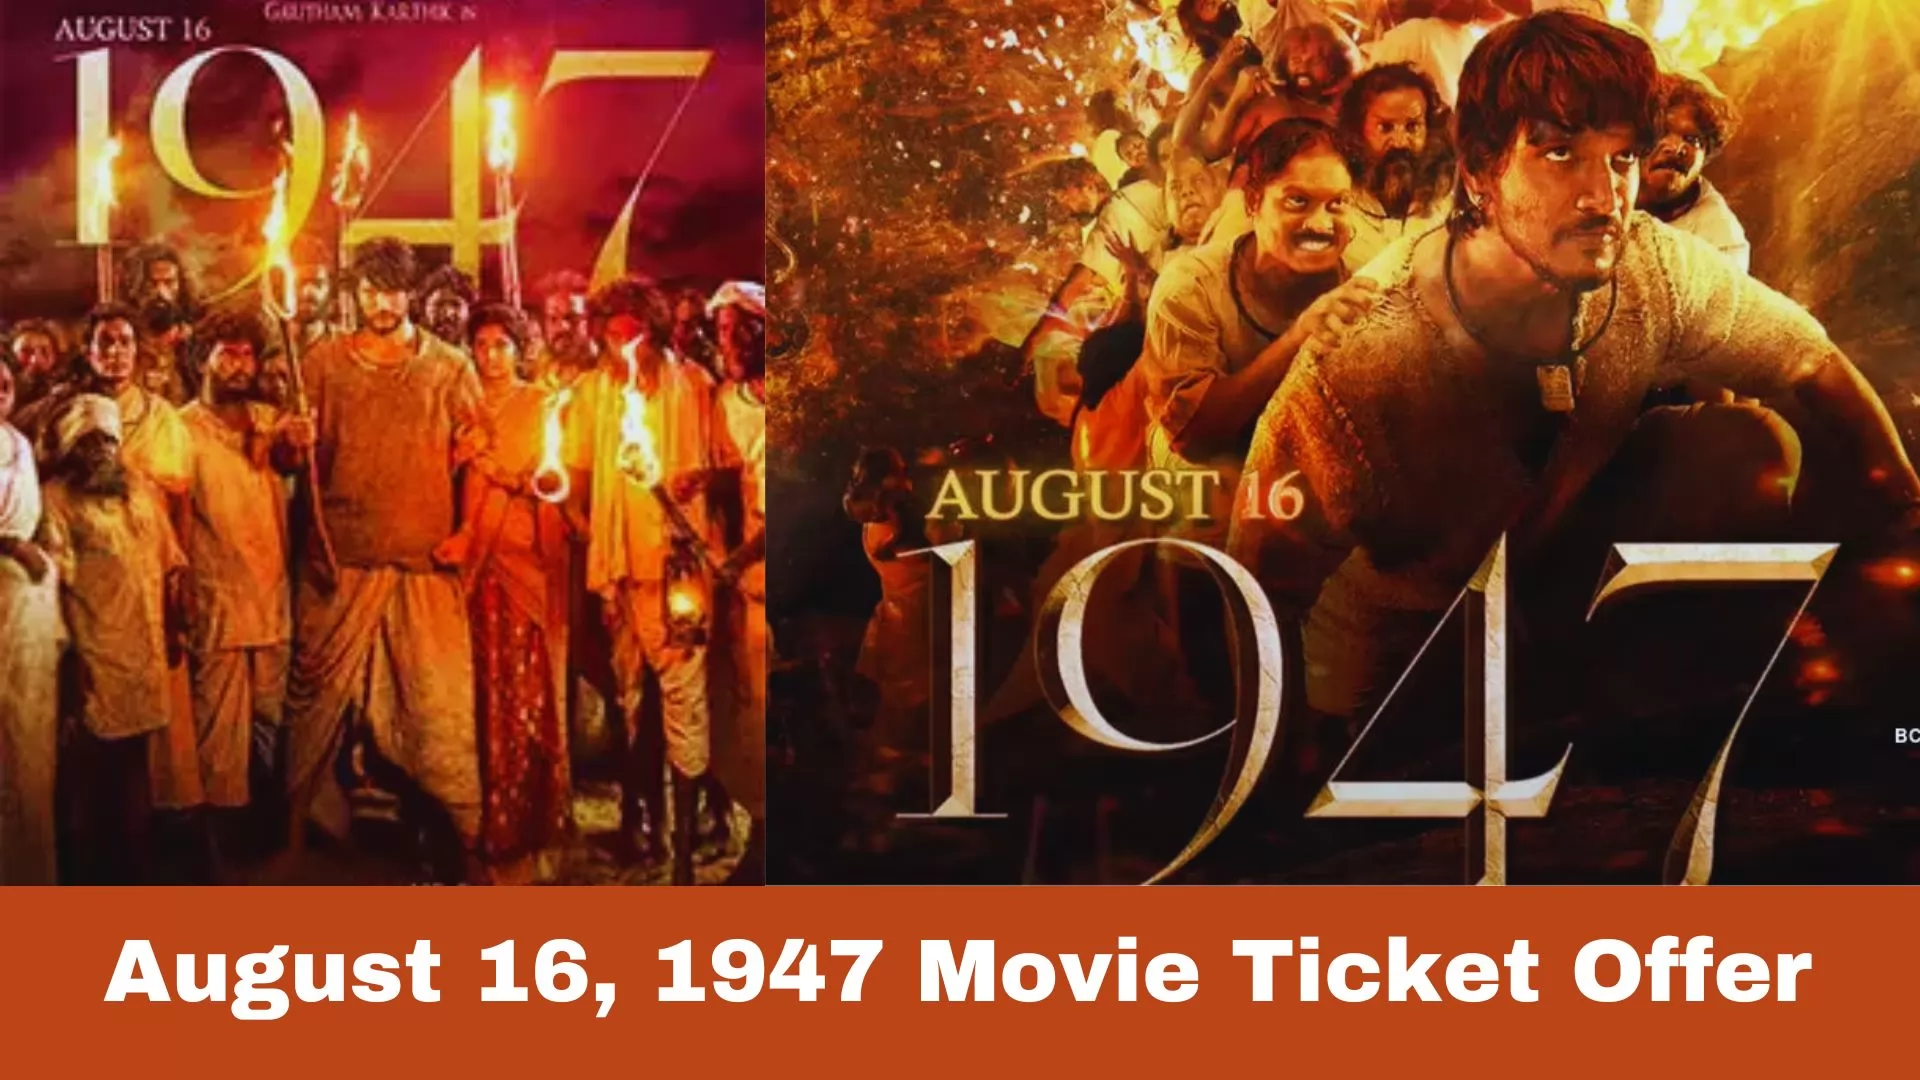 August 16, 1947 Movie Ticket Offer: Review | Release Date & More